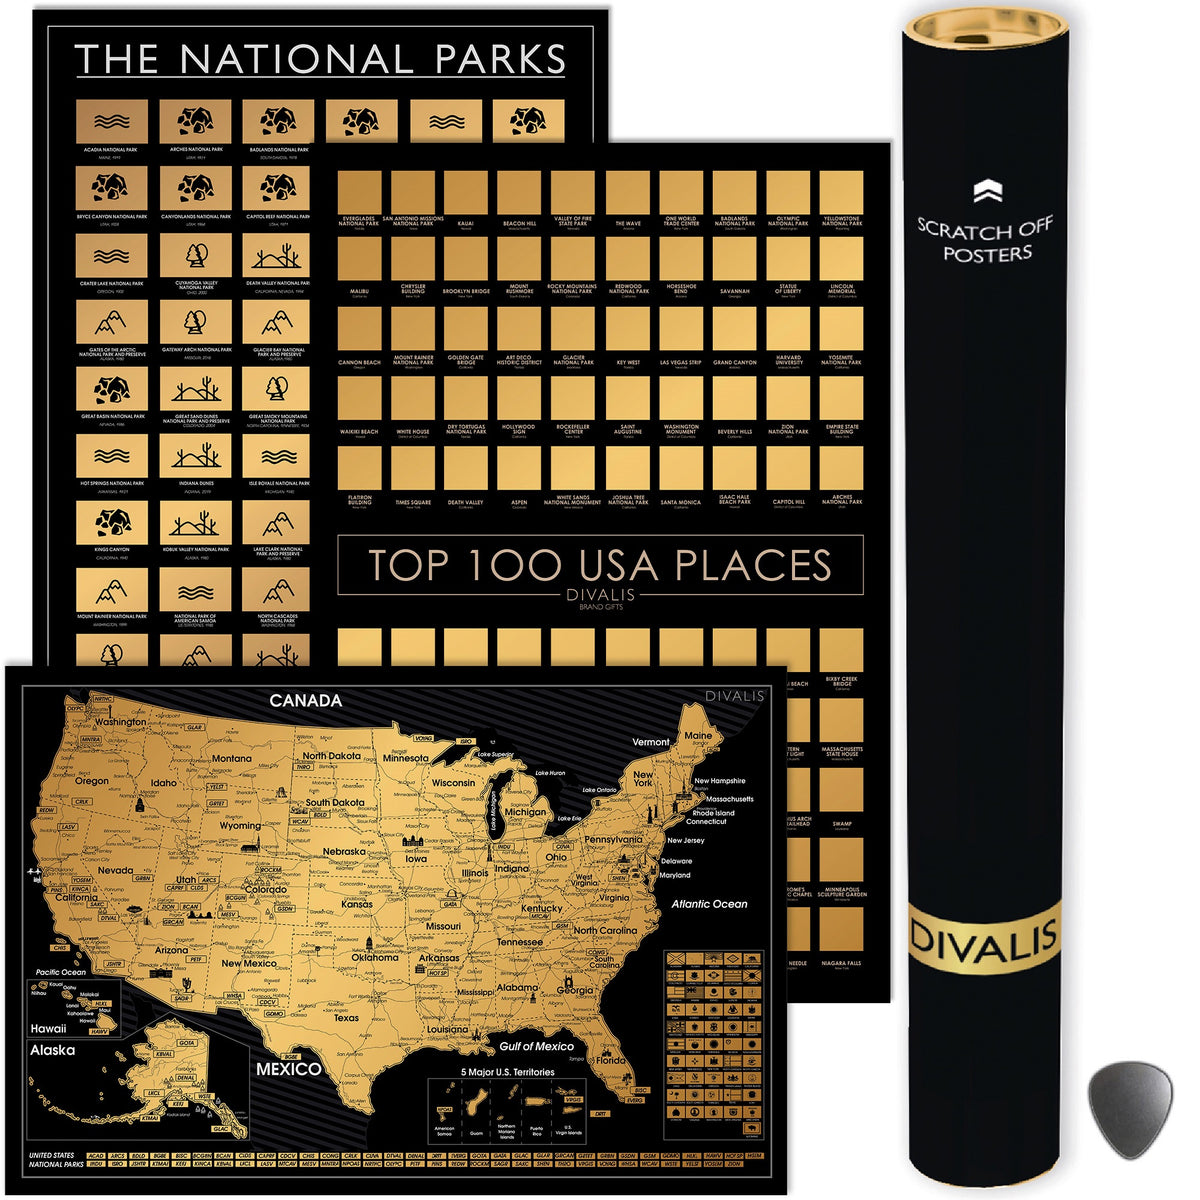 3 in 1 Gift Set - Scratch off National Parks Poster - Scratch off